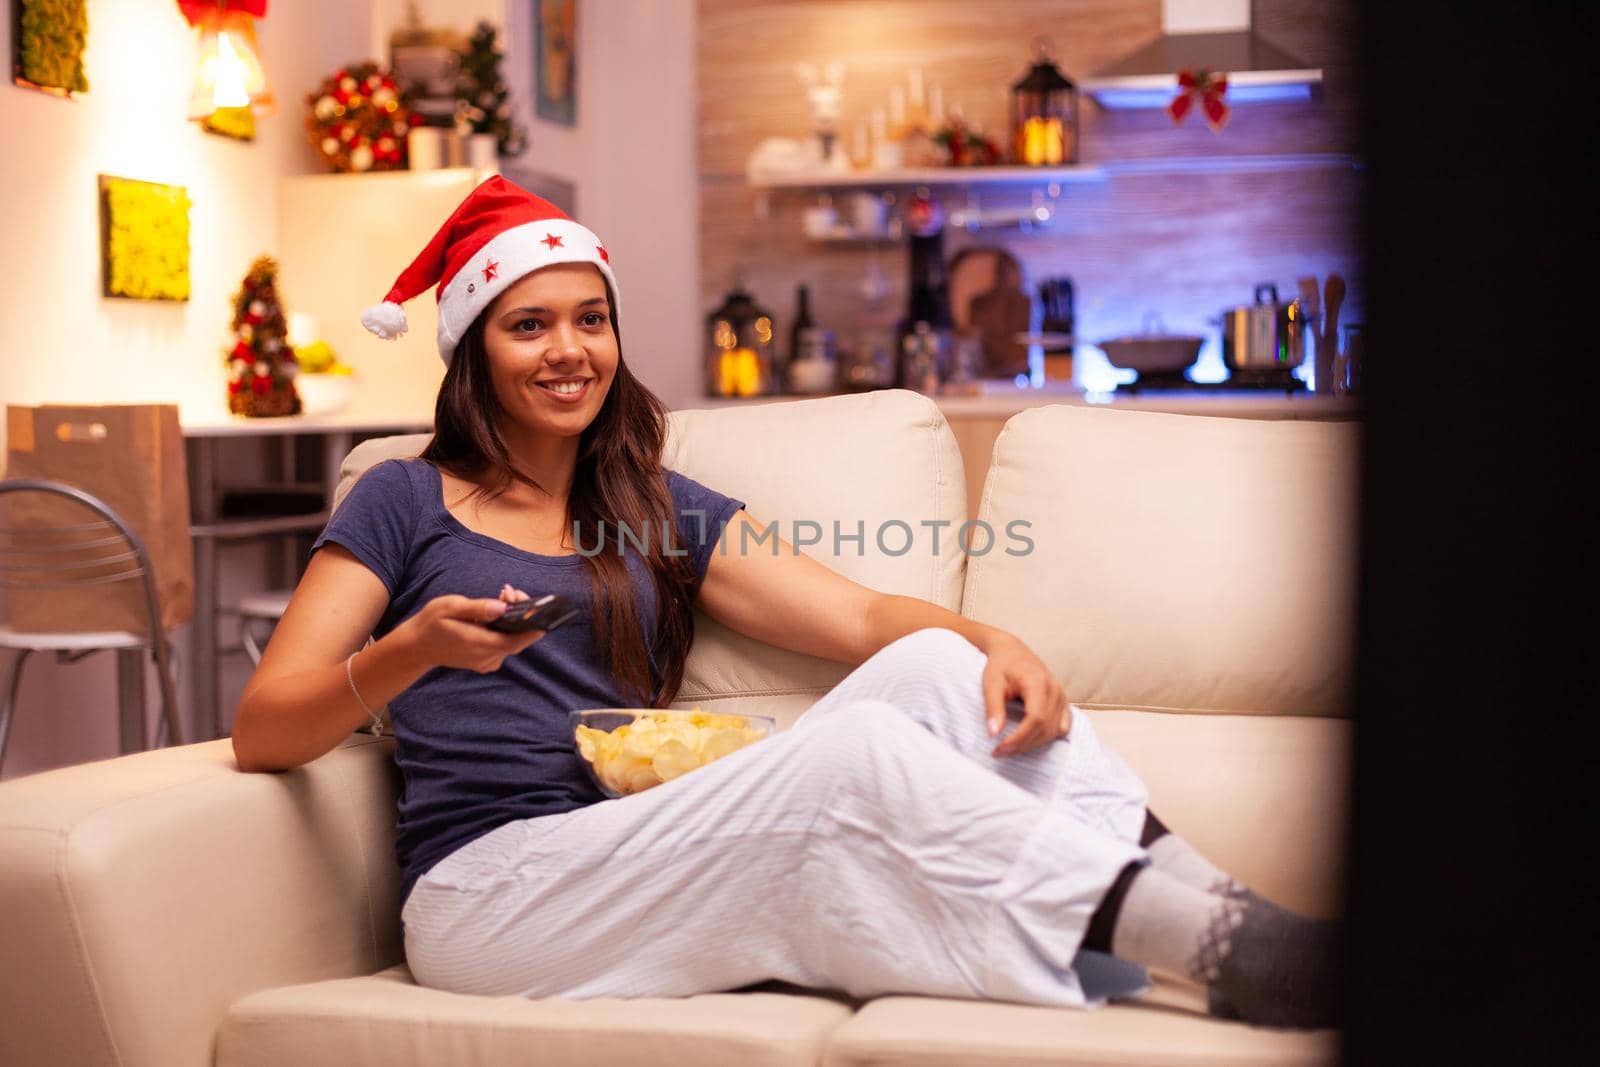 Adult person wearing red santa hat lying on couch watching christmas comedy movie during christmastime in xmas decorated kitchen. Woman enjoying winter season celebrating x-mas holiday